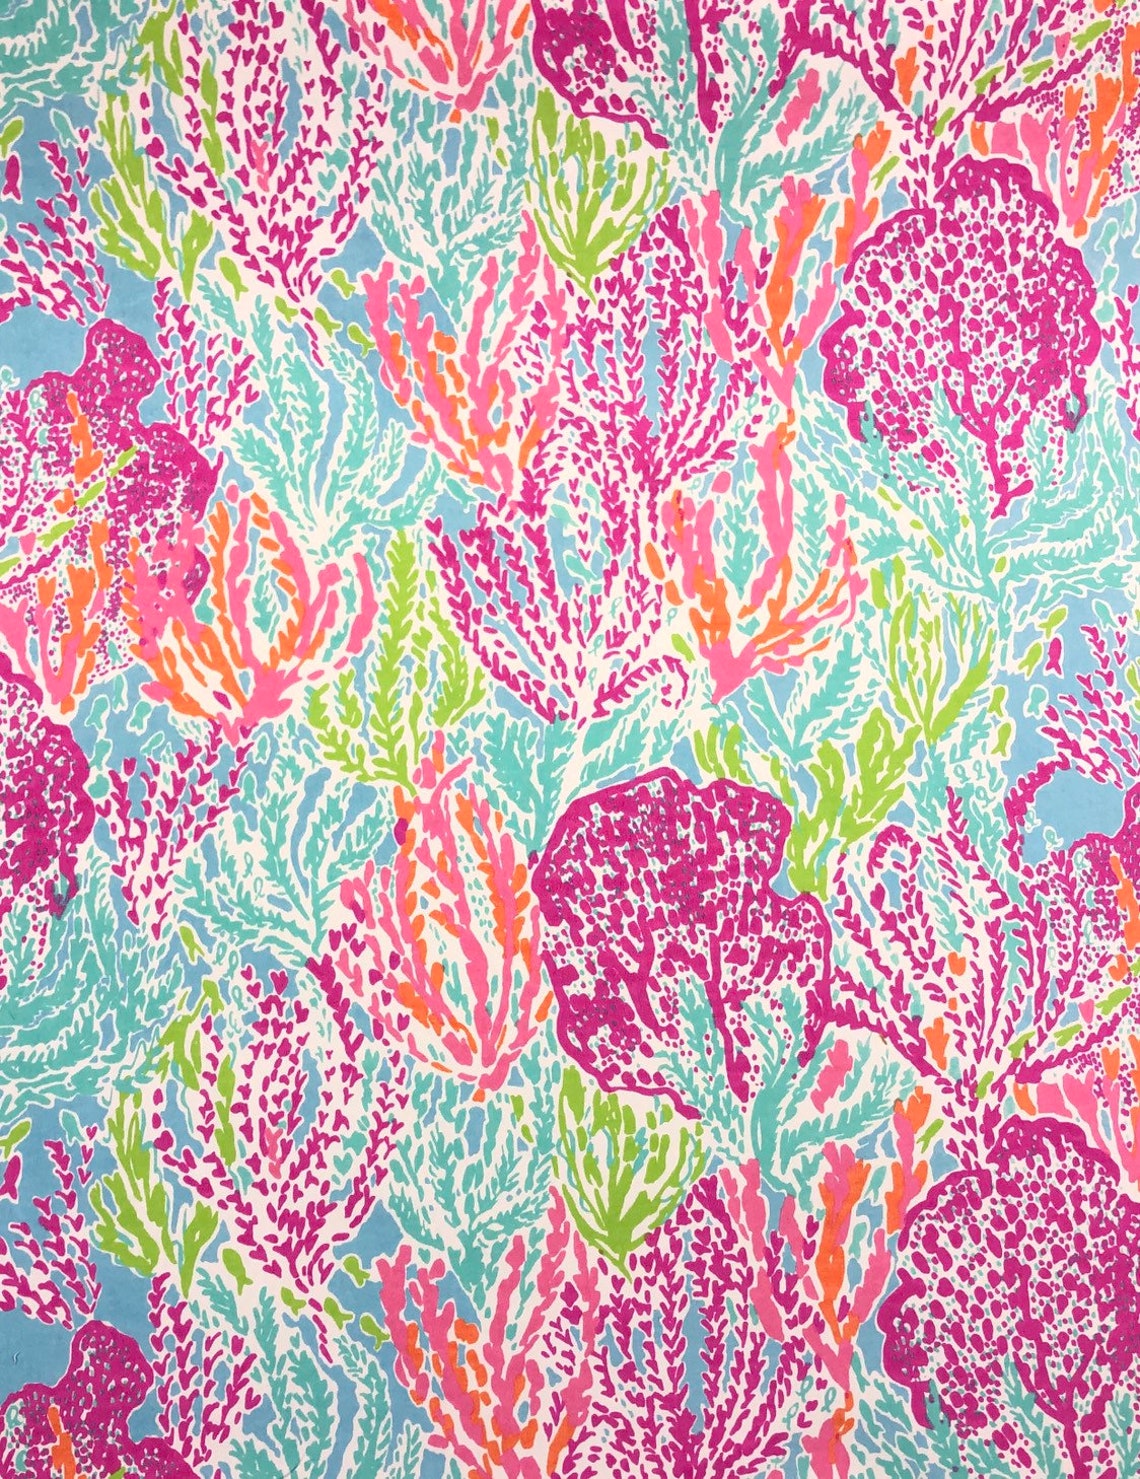 Lilly Pulitzer Let's Cha Cha Lee Jofa Bright Colors | Etsy